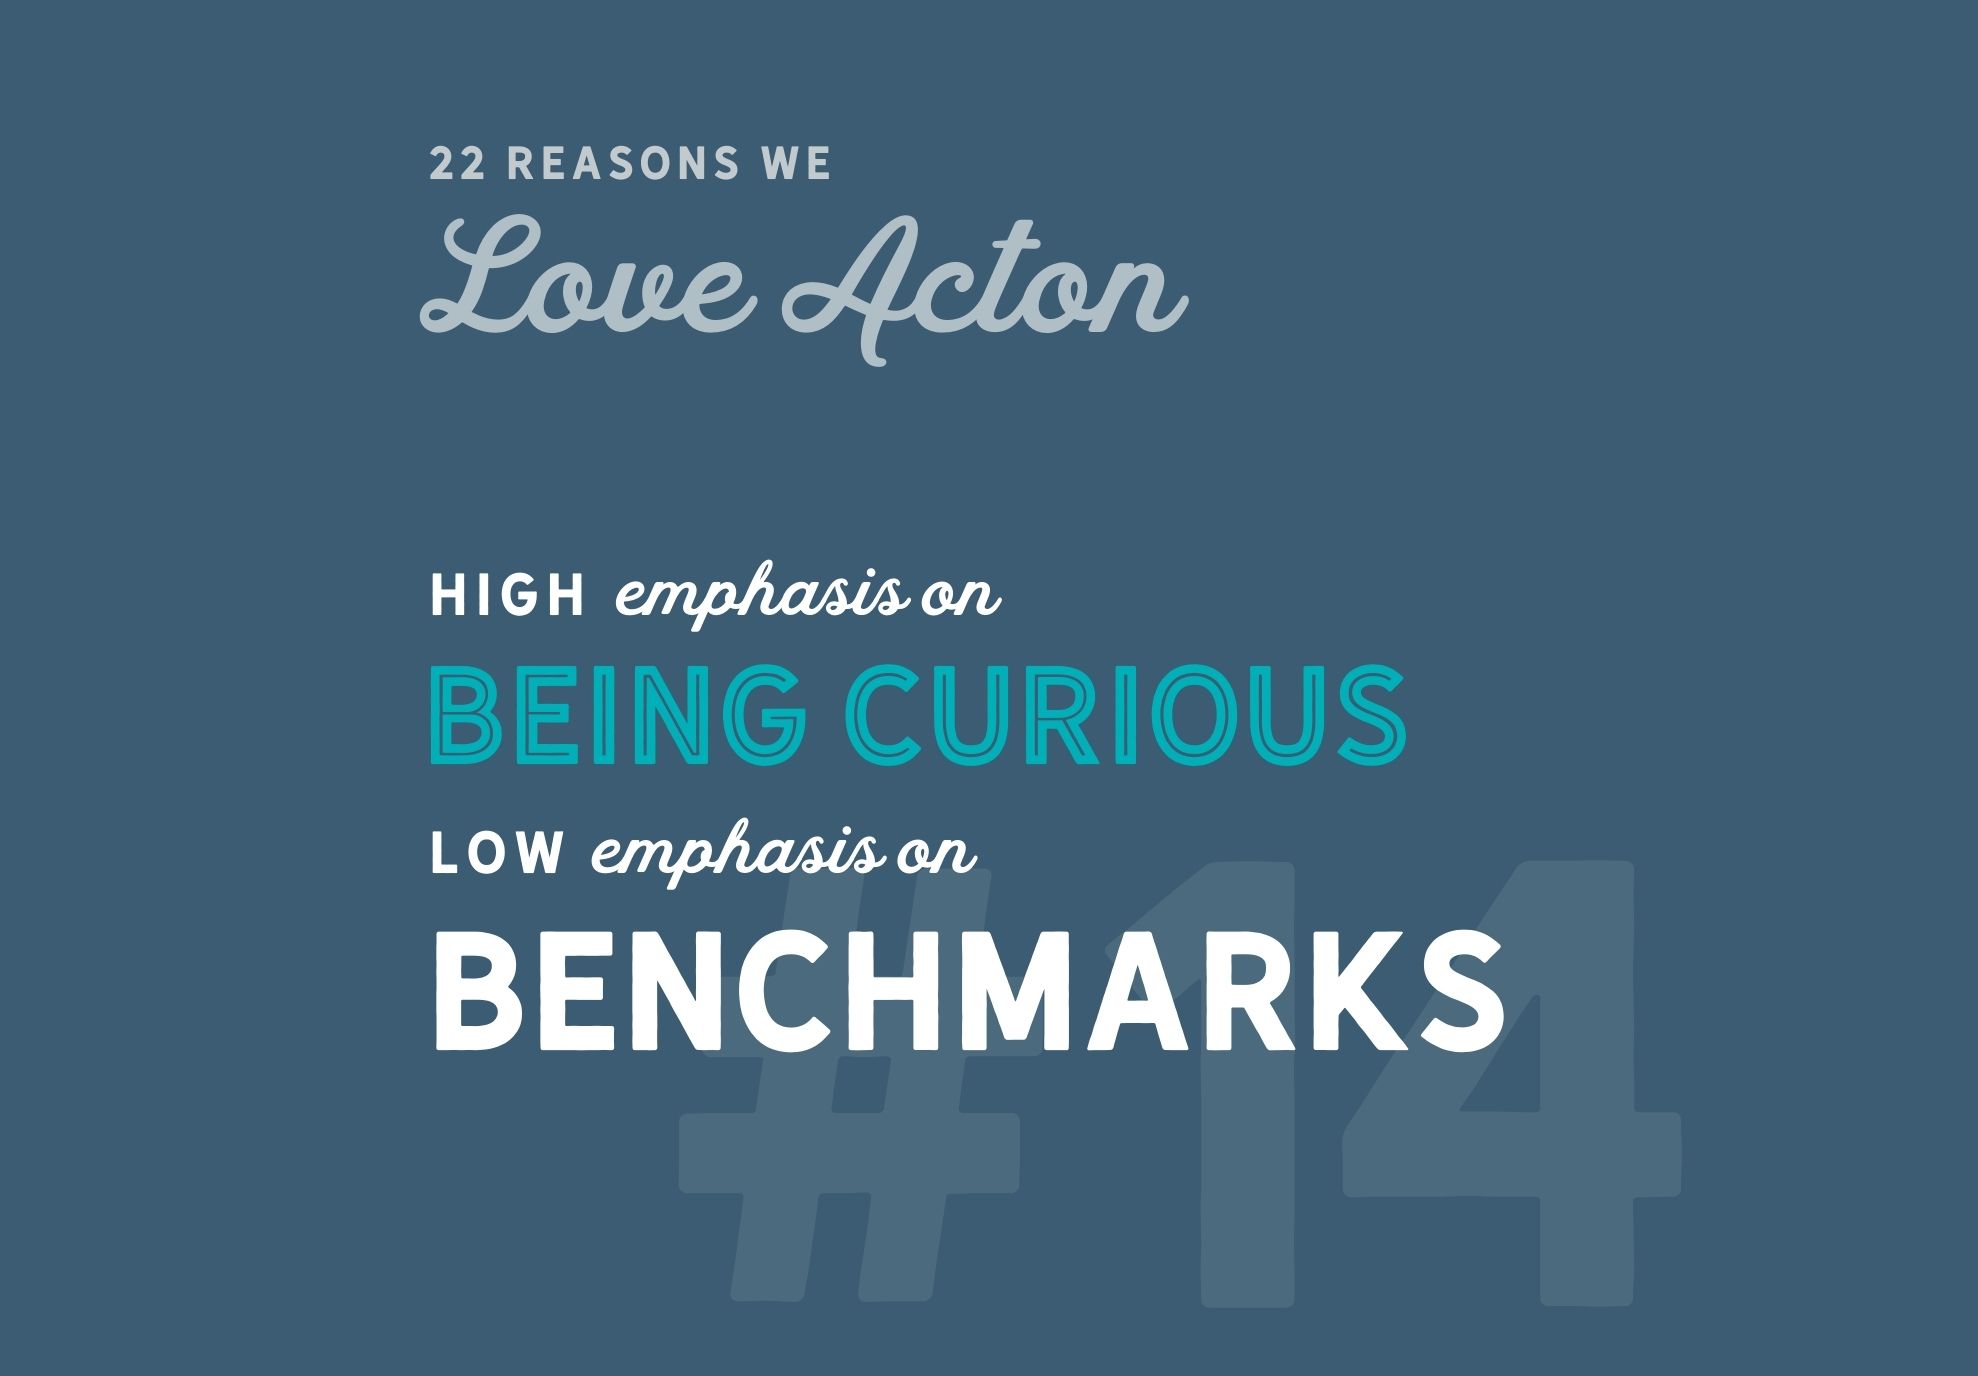 #14 High Emphasis on Being Curious, Low Emphasis on Benchmarks